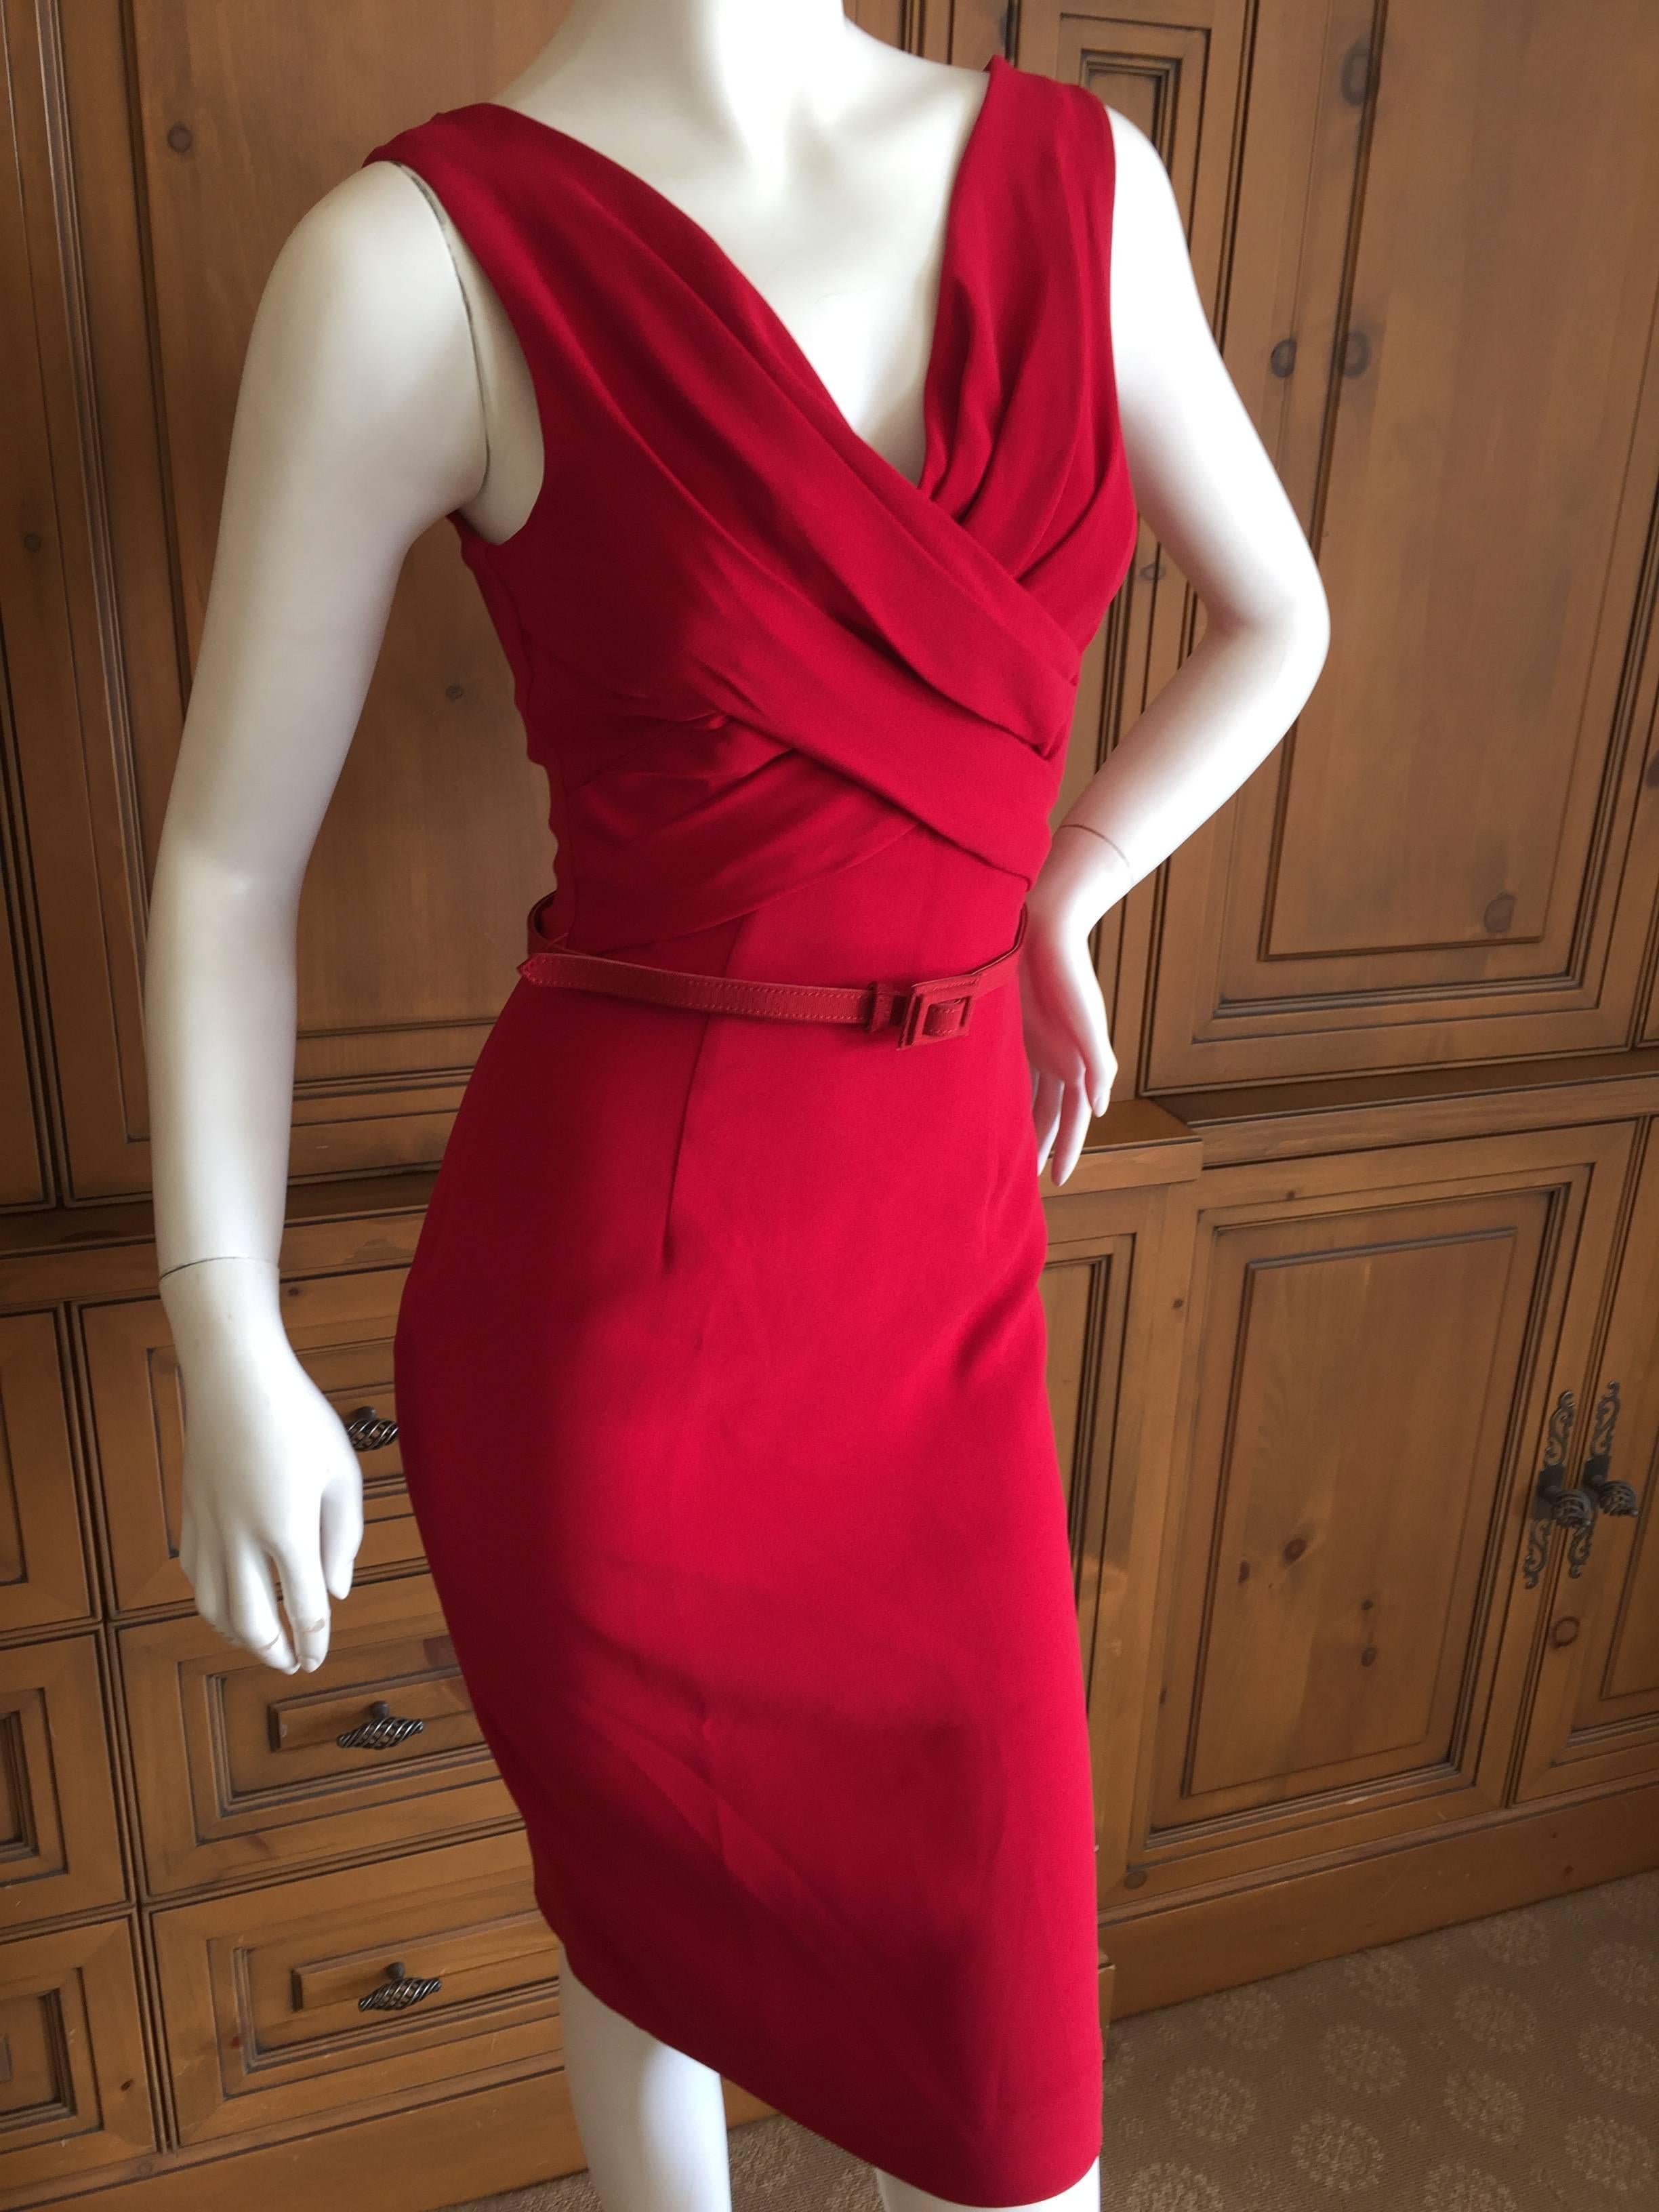 Dior by John Galliano Red Belted Dress 1